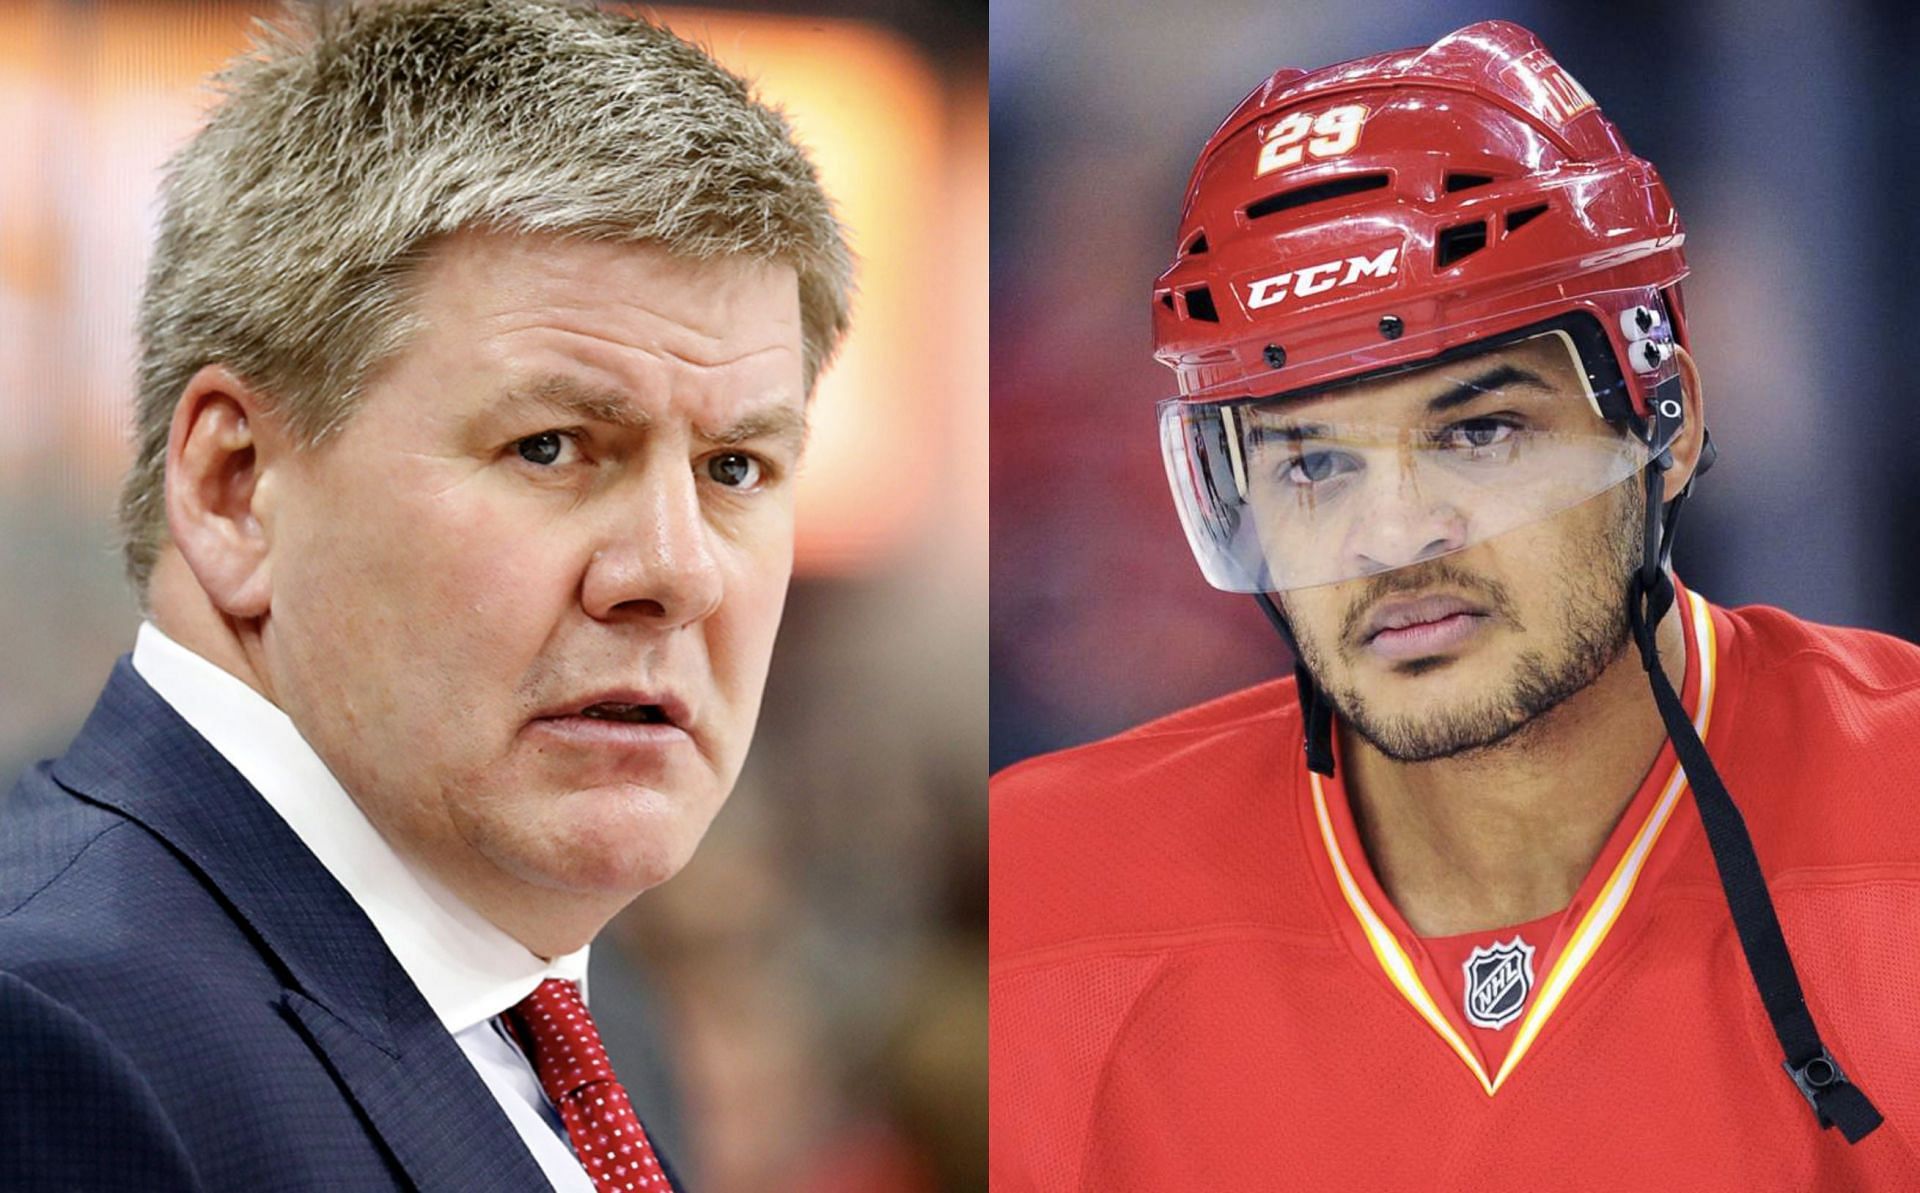 Akim Aliu slams Bill Peters over his attempt at an apology over racial remarks